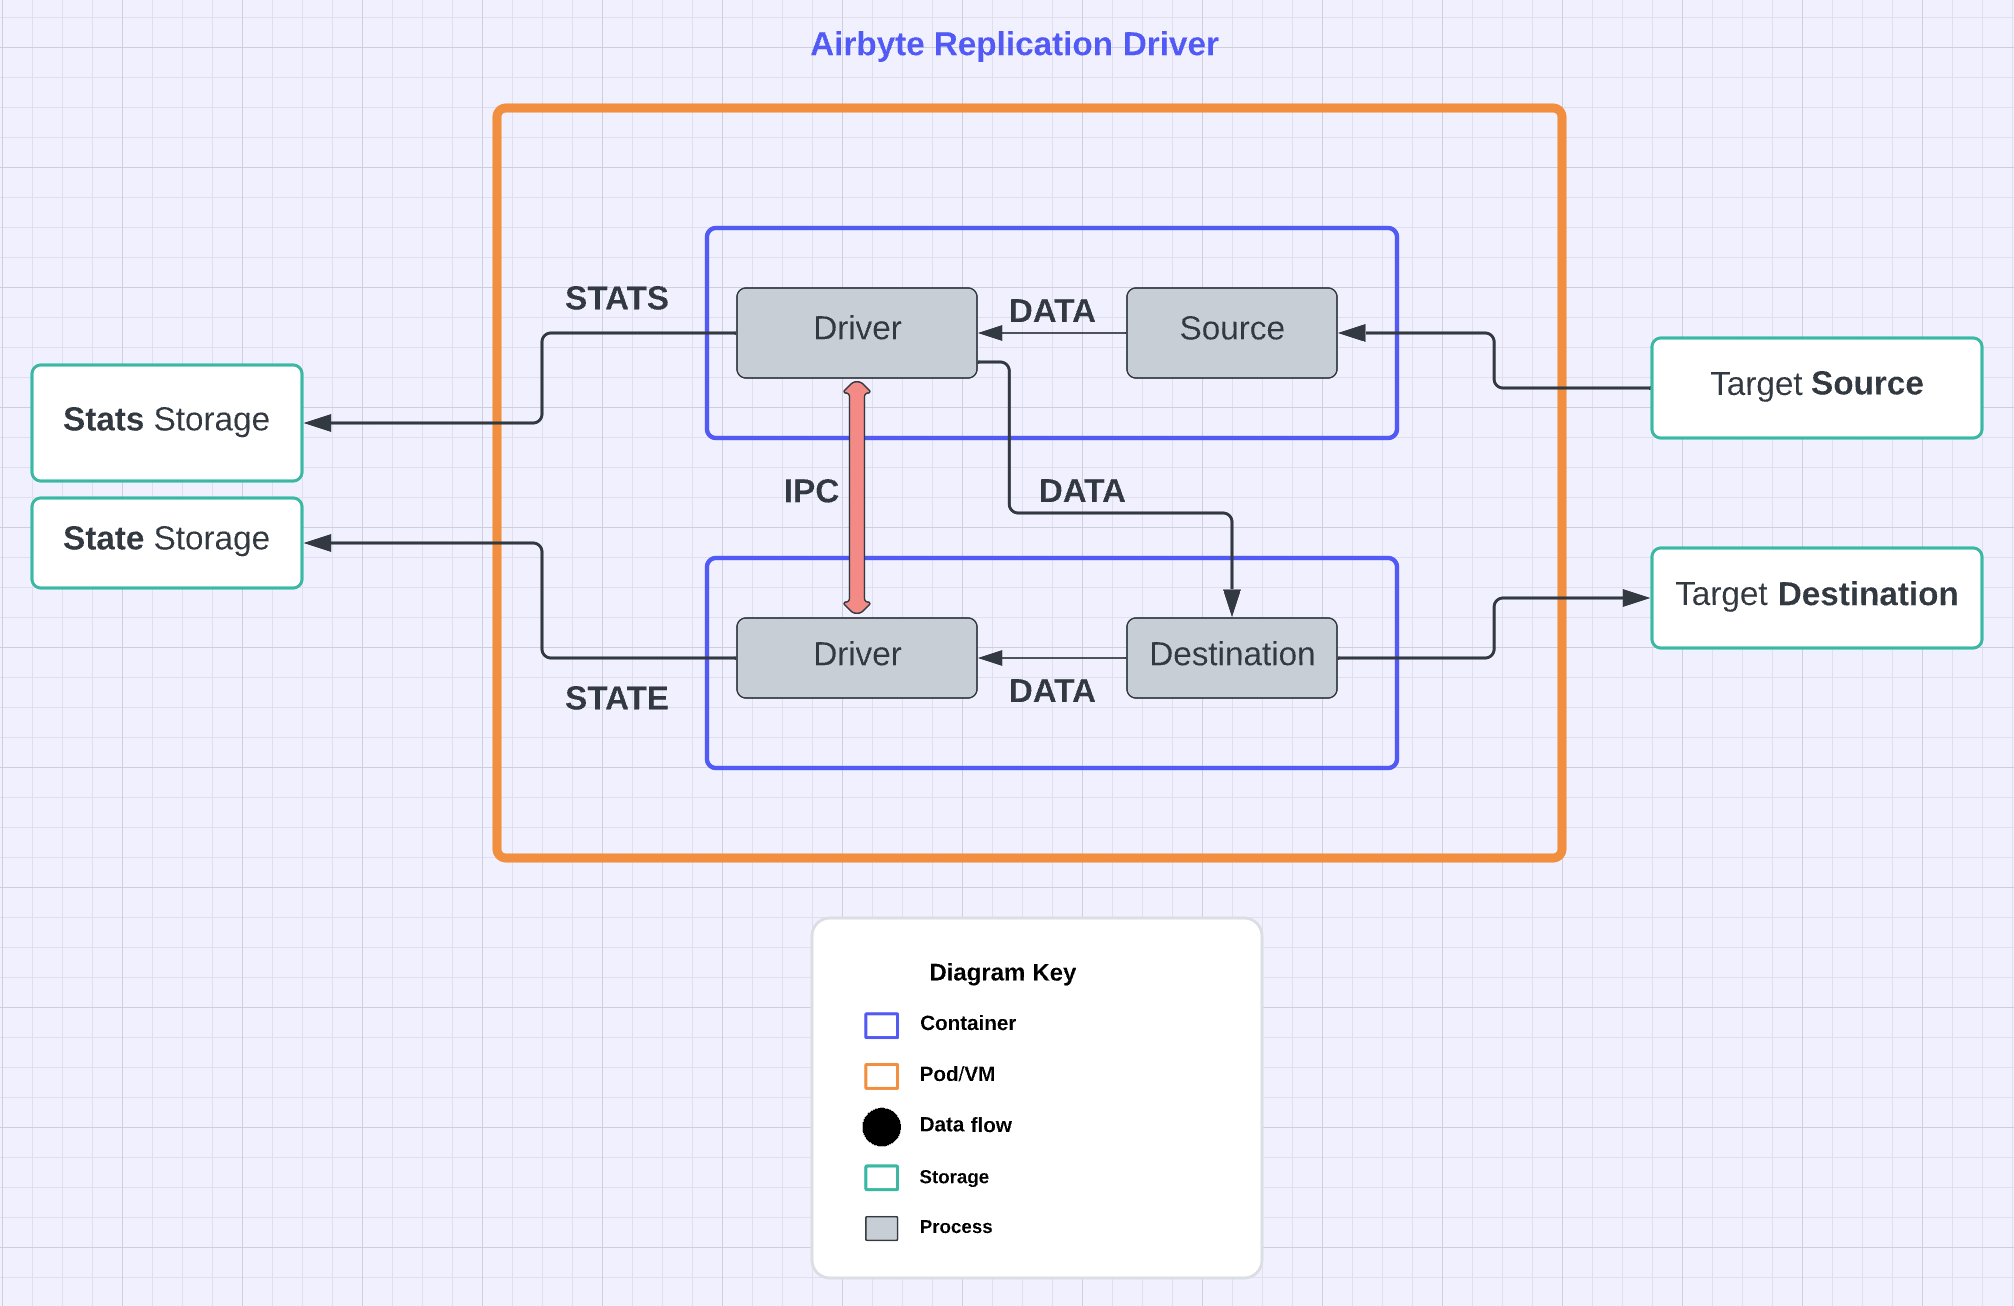 Airbyte Replication Driver